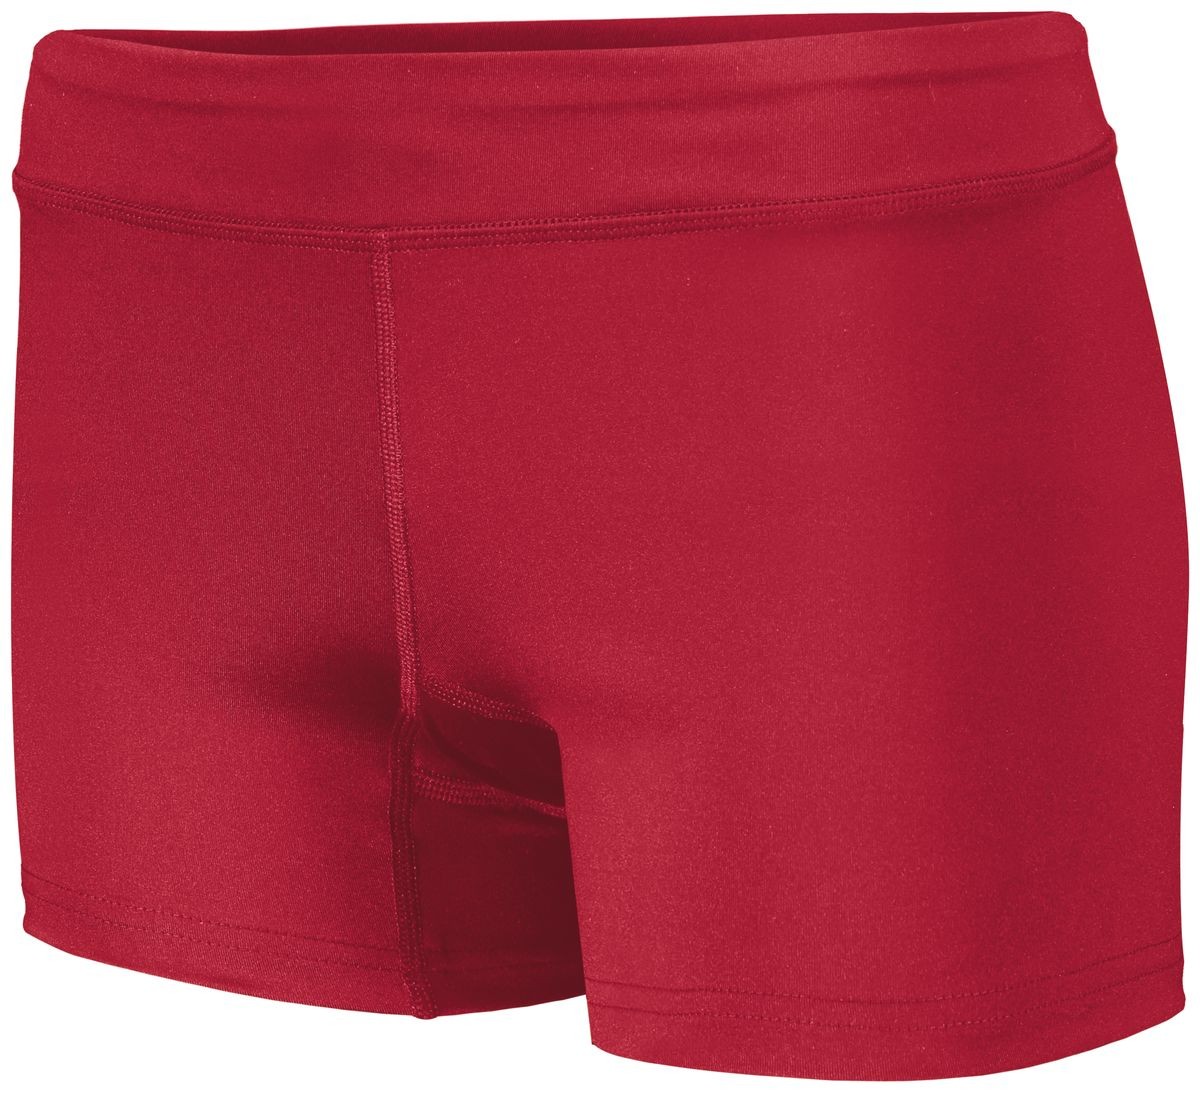 Augusta Women's TruHit Volleyball Shorts - image 1 of 5